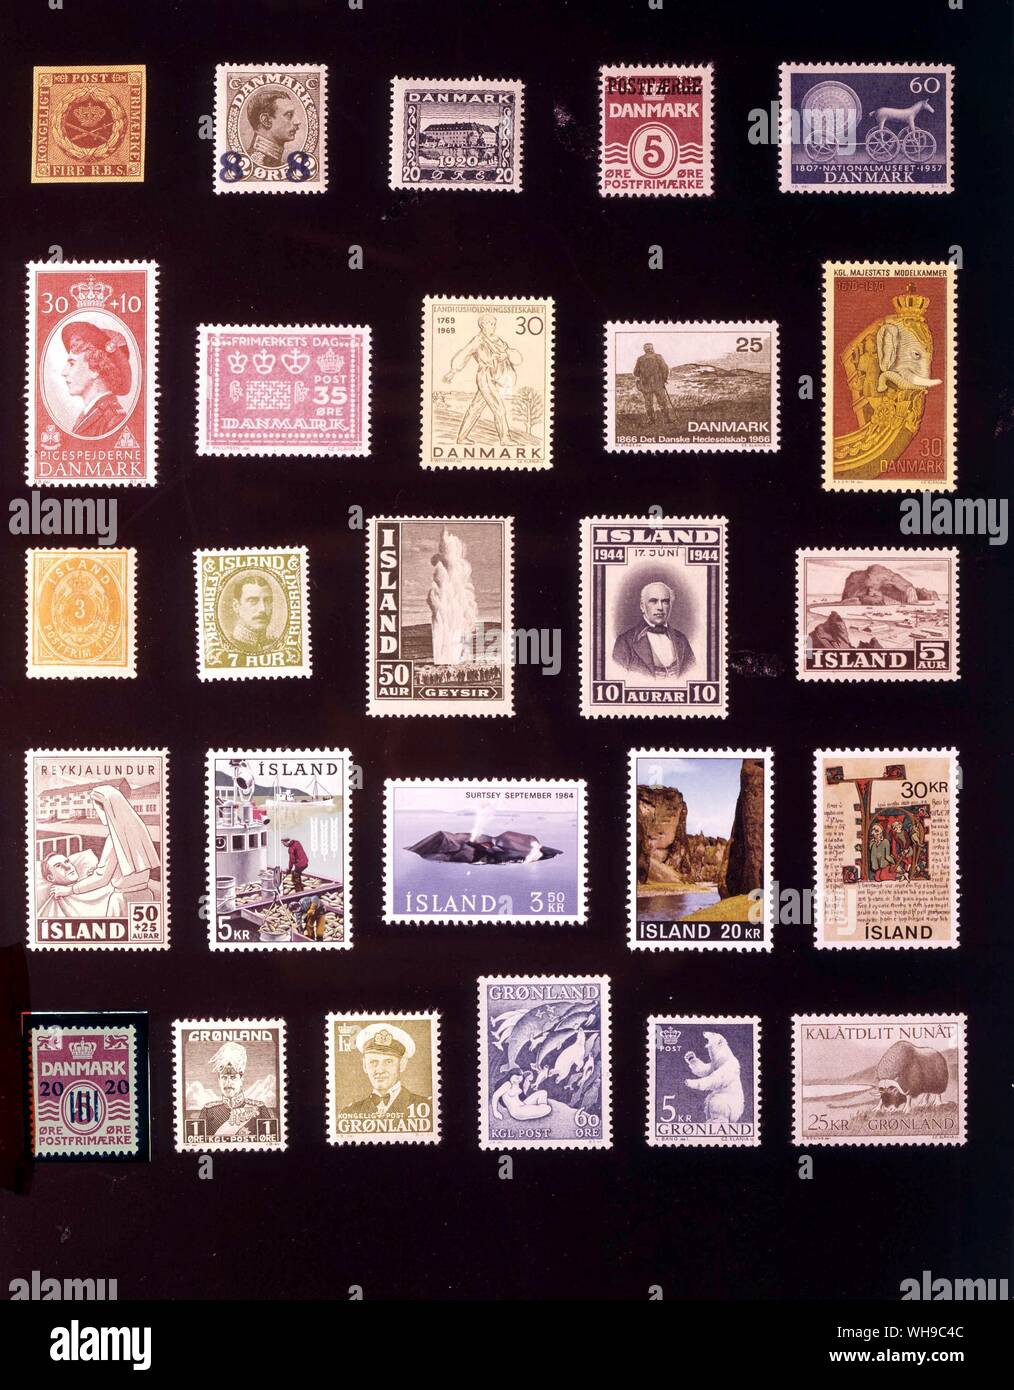 EUROPE - DENMARK/ICELAND/GREENLAND: (left to right) 1. Denmark, 4 rigsbankskilling, 1851, 2. Denmark, 8 ore, 1921, 3. Denmark, 20 ore, 1920, 4. Denmark, 5 ore, 1942, 5. Denmark, 60 ore, 1957, 6. Denmark, 30 + 10 ore, 1960, 7. Denmark, 35 ore, 1964, 8. Denmark, 30 ore, 1969, 9. Denmark, 25 ore, 1966, 10. Denmark, 30 ore, 1970, 11. Iceland, 3 aurar, 1882, 12. Iceland, 7 aurar, 19433, 13. Iceland, 50 aurar, 1938, 14. Iceland, 10 aurar, 1944. 15. Iceland, 5 aurar, 1950, 16. Iceland, 50 + 25 aurar, 1949, 17. Iceland, 5 kronur, 1963, 18. Iceland, 3.50 kronur, 1965, 19. Iceland, 20 kronur, 1970, 20. Stock Photo